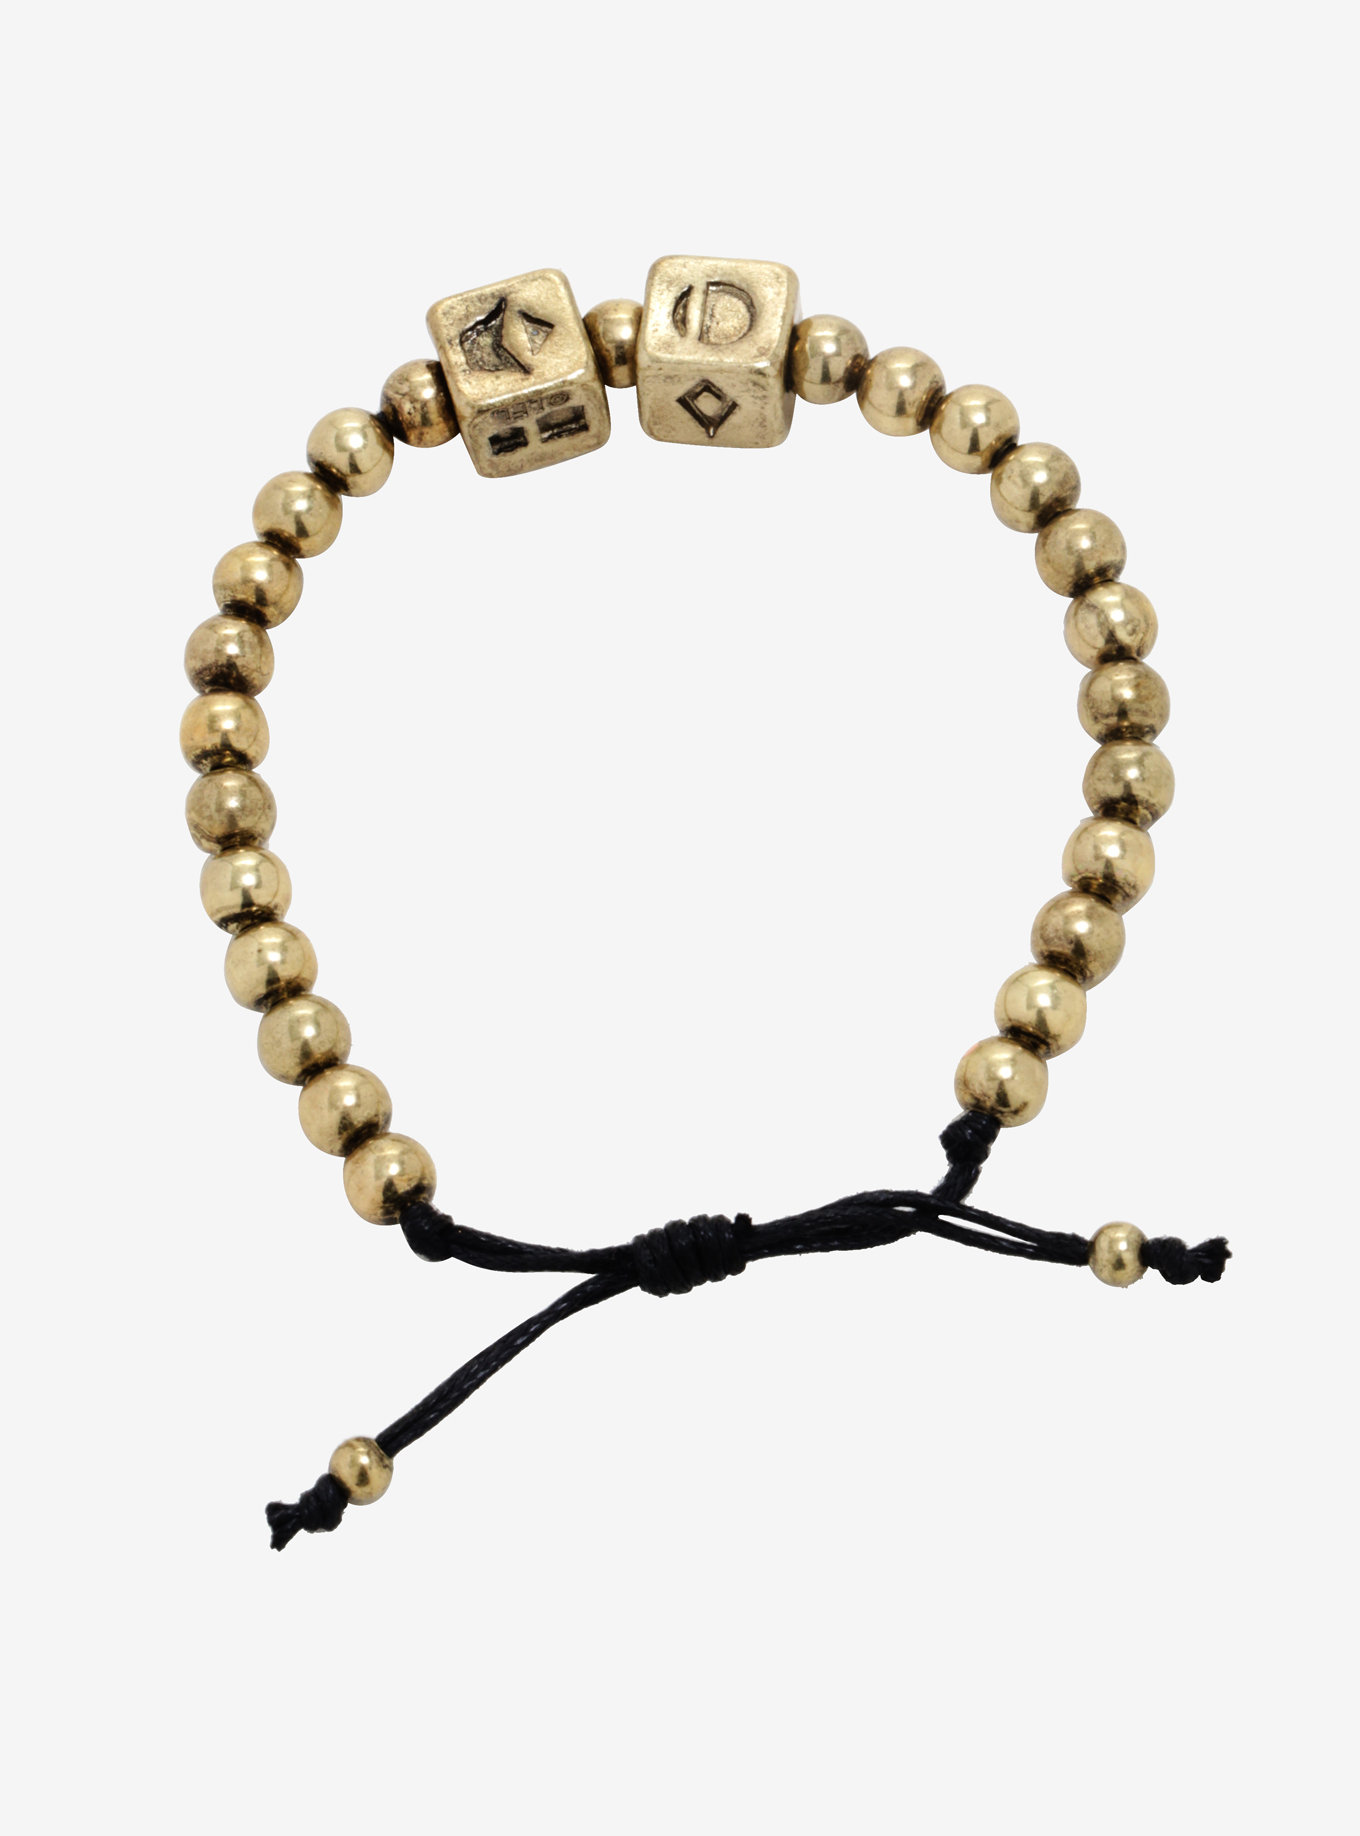 Star Wars Solo A Star Wars Story Dice Beaded Bracelet available exclusively at Box Lunch